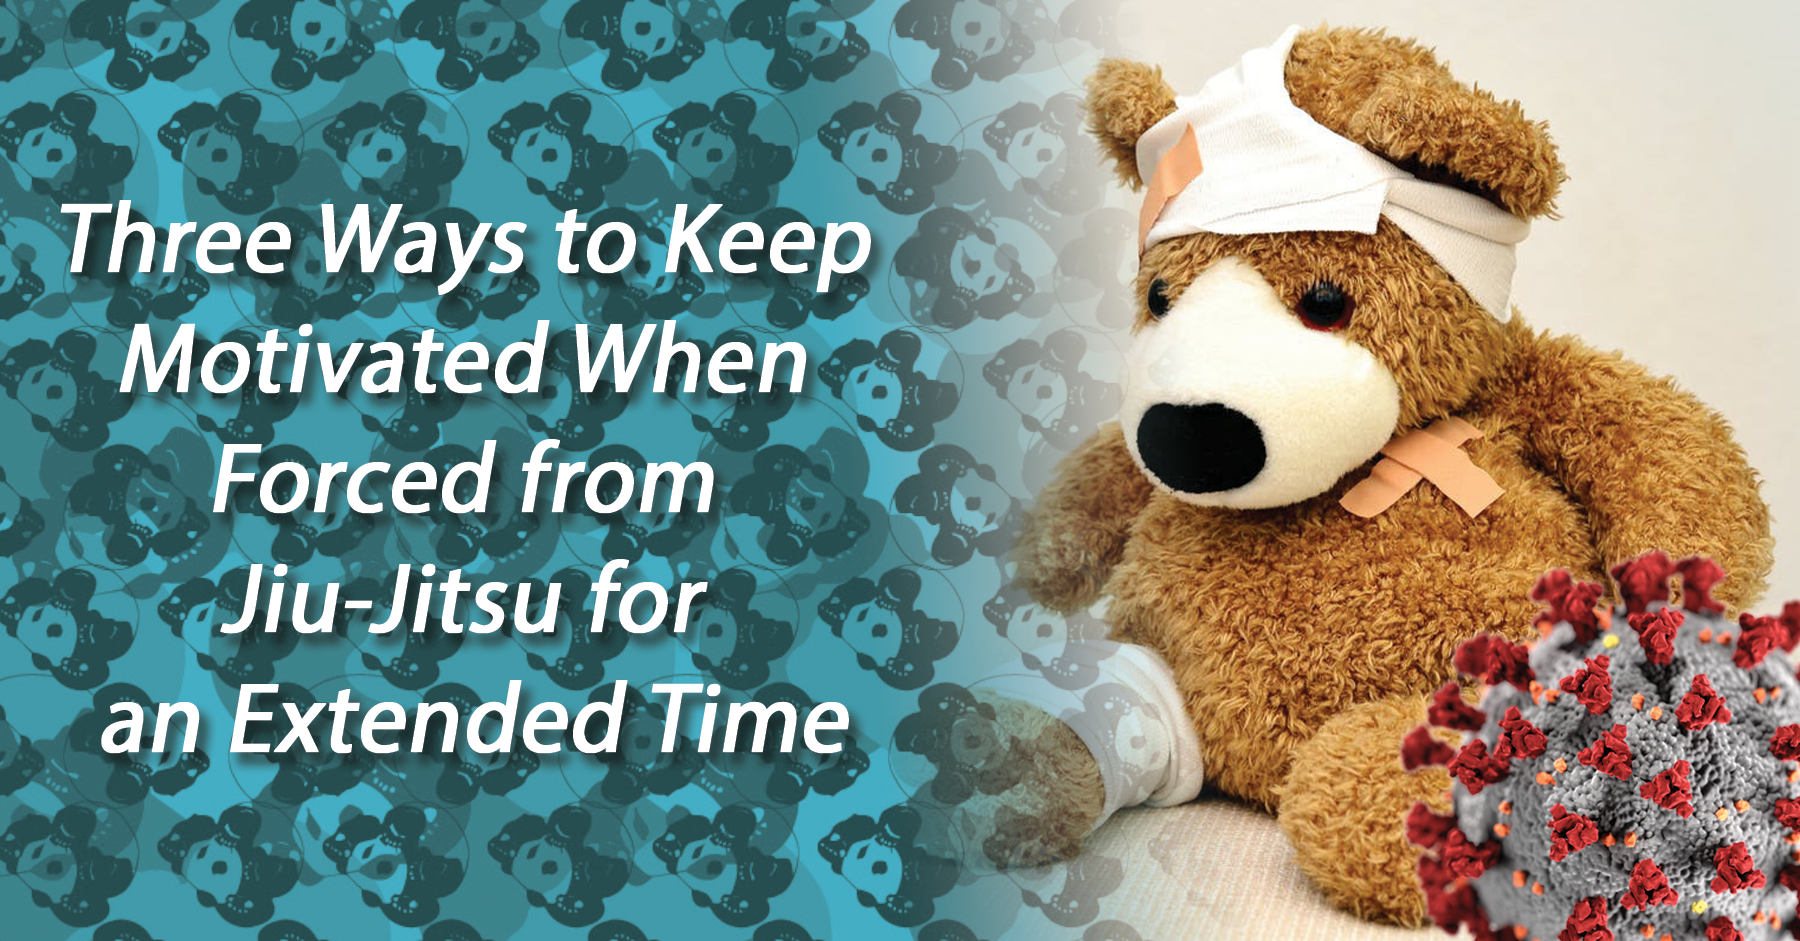 Three Ways to Keep Motivated When Forced from Jiu-Jitsu for an Extended Time